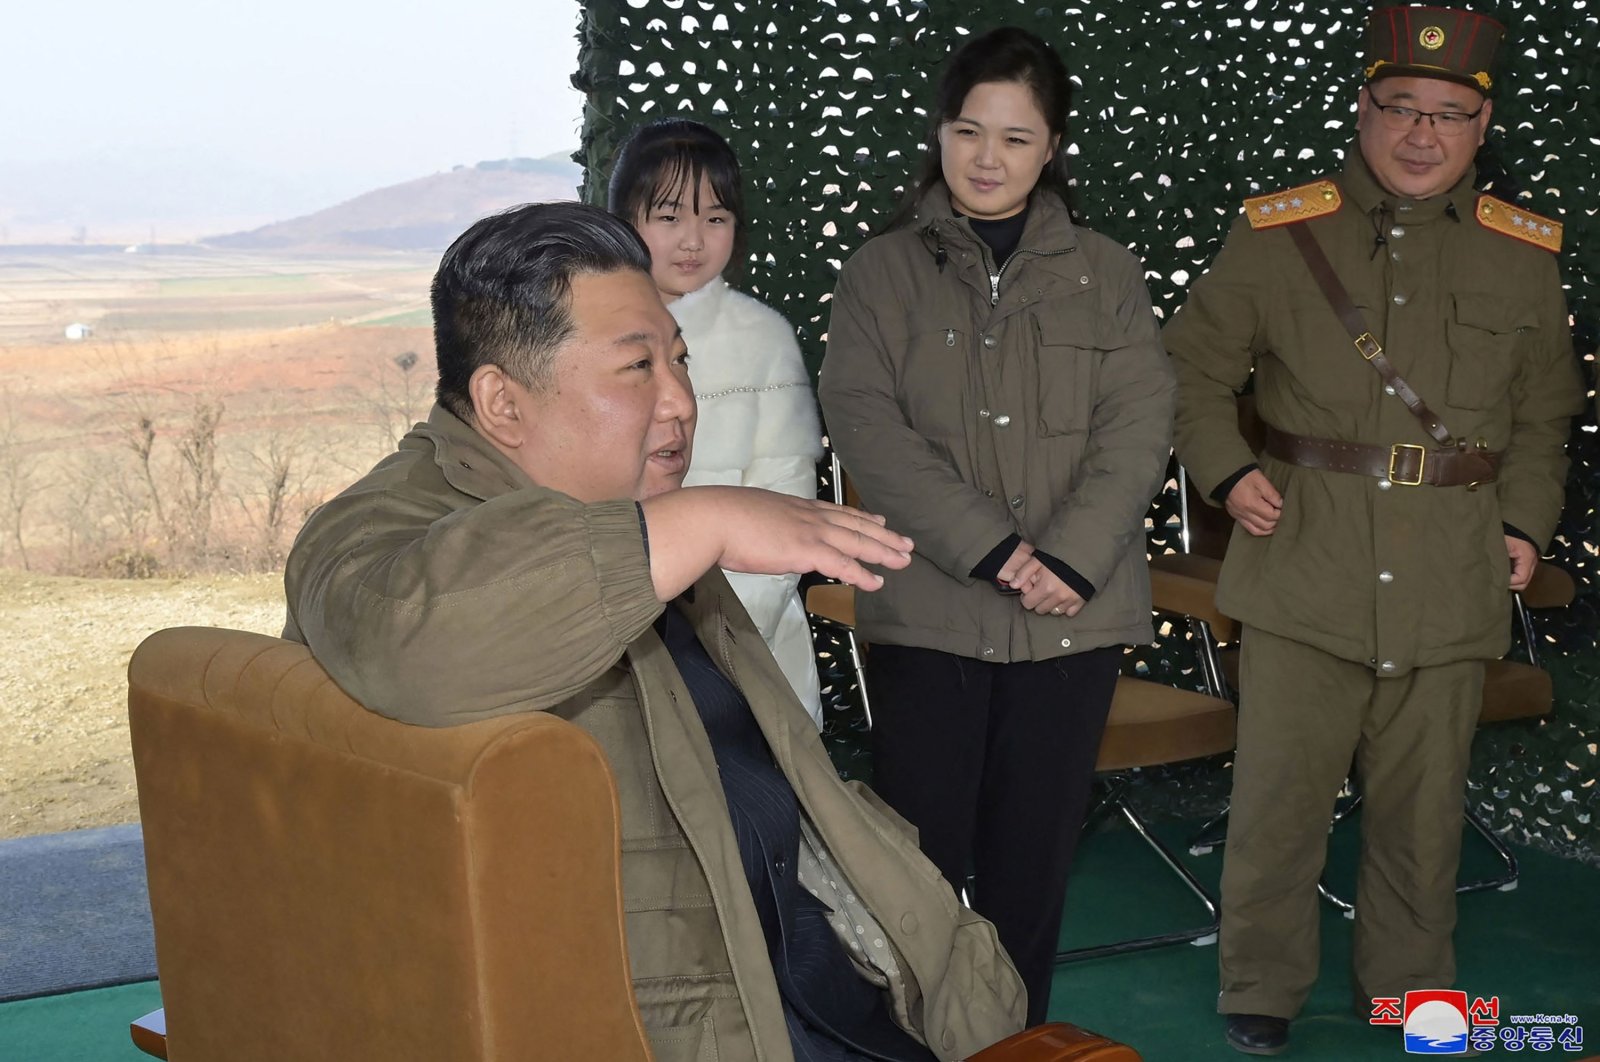 This picture taken on Nov. 18, 2022, and released by North Korea&#039;s official Korean Central News Agency (KCNA) on Nov. 19, 2022 shows North Korea&#039;s leader Kim Jong Un (Left), with his wife Ri Sol Ju (2nd Right) and his daughter (2nd Left-behind), as they attend the test-firing of the new intercontinental ballistic missile (ICBM) "Hwasong Gun 17" type at an undisclosed location in North Korea. (Photo by KCNA VIA KNS / AFP)